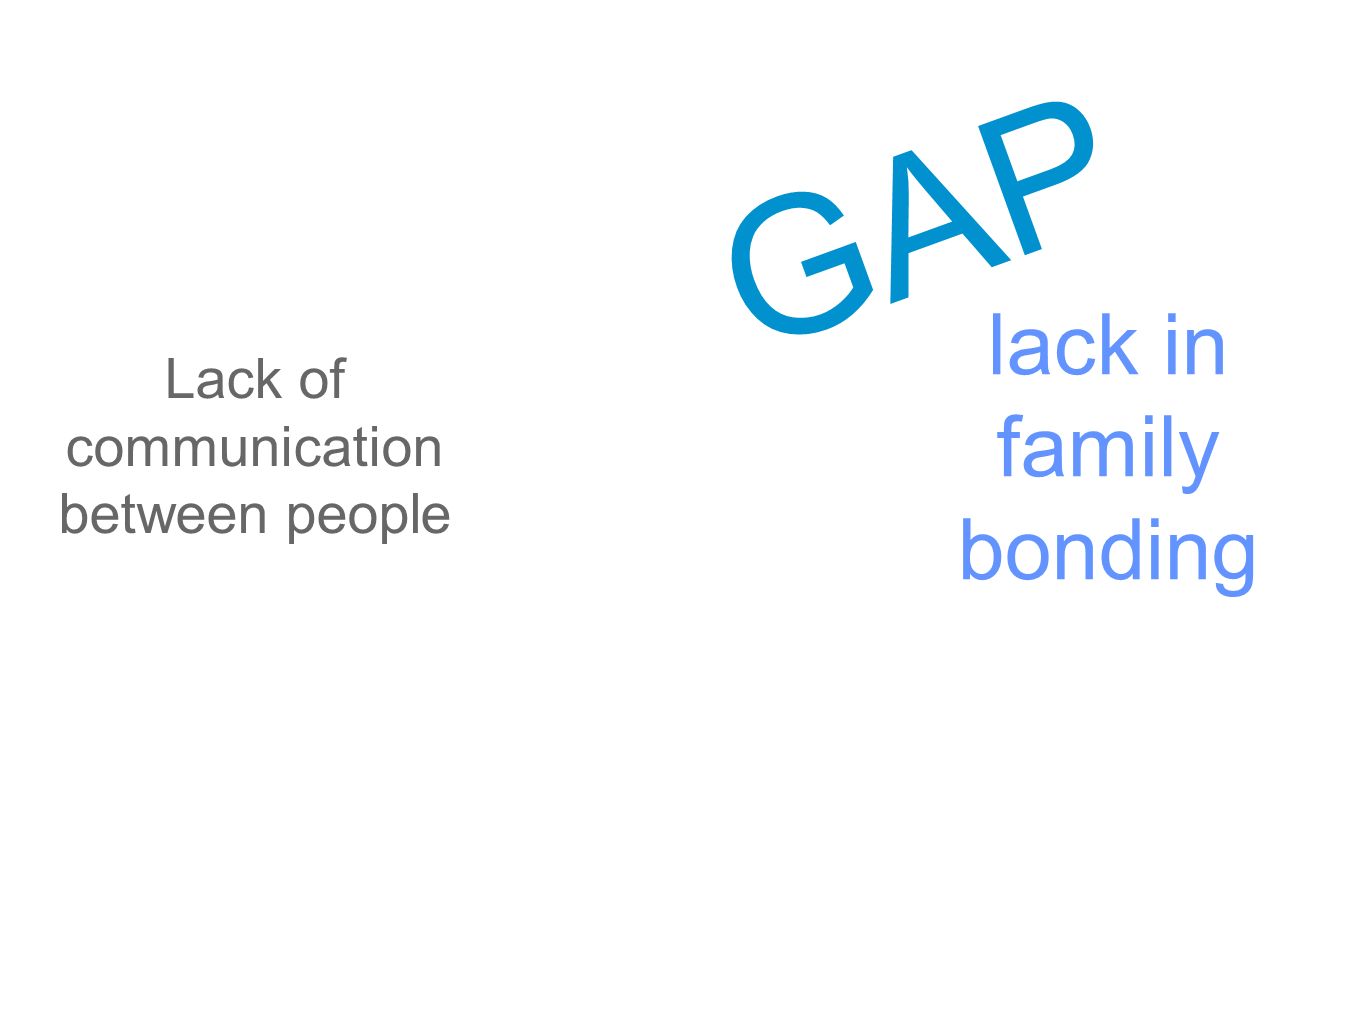 Lack of communication between people lack in family bonding GAP